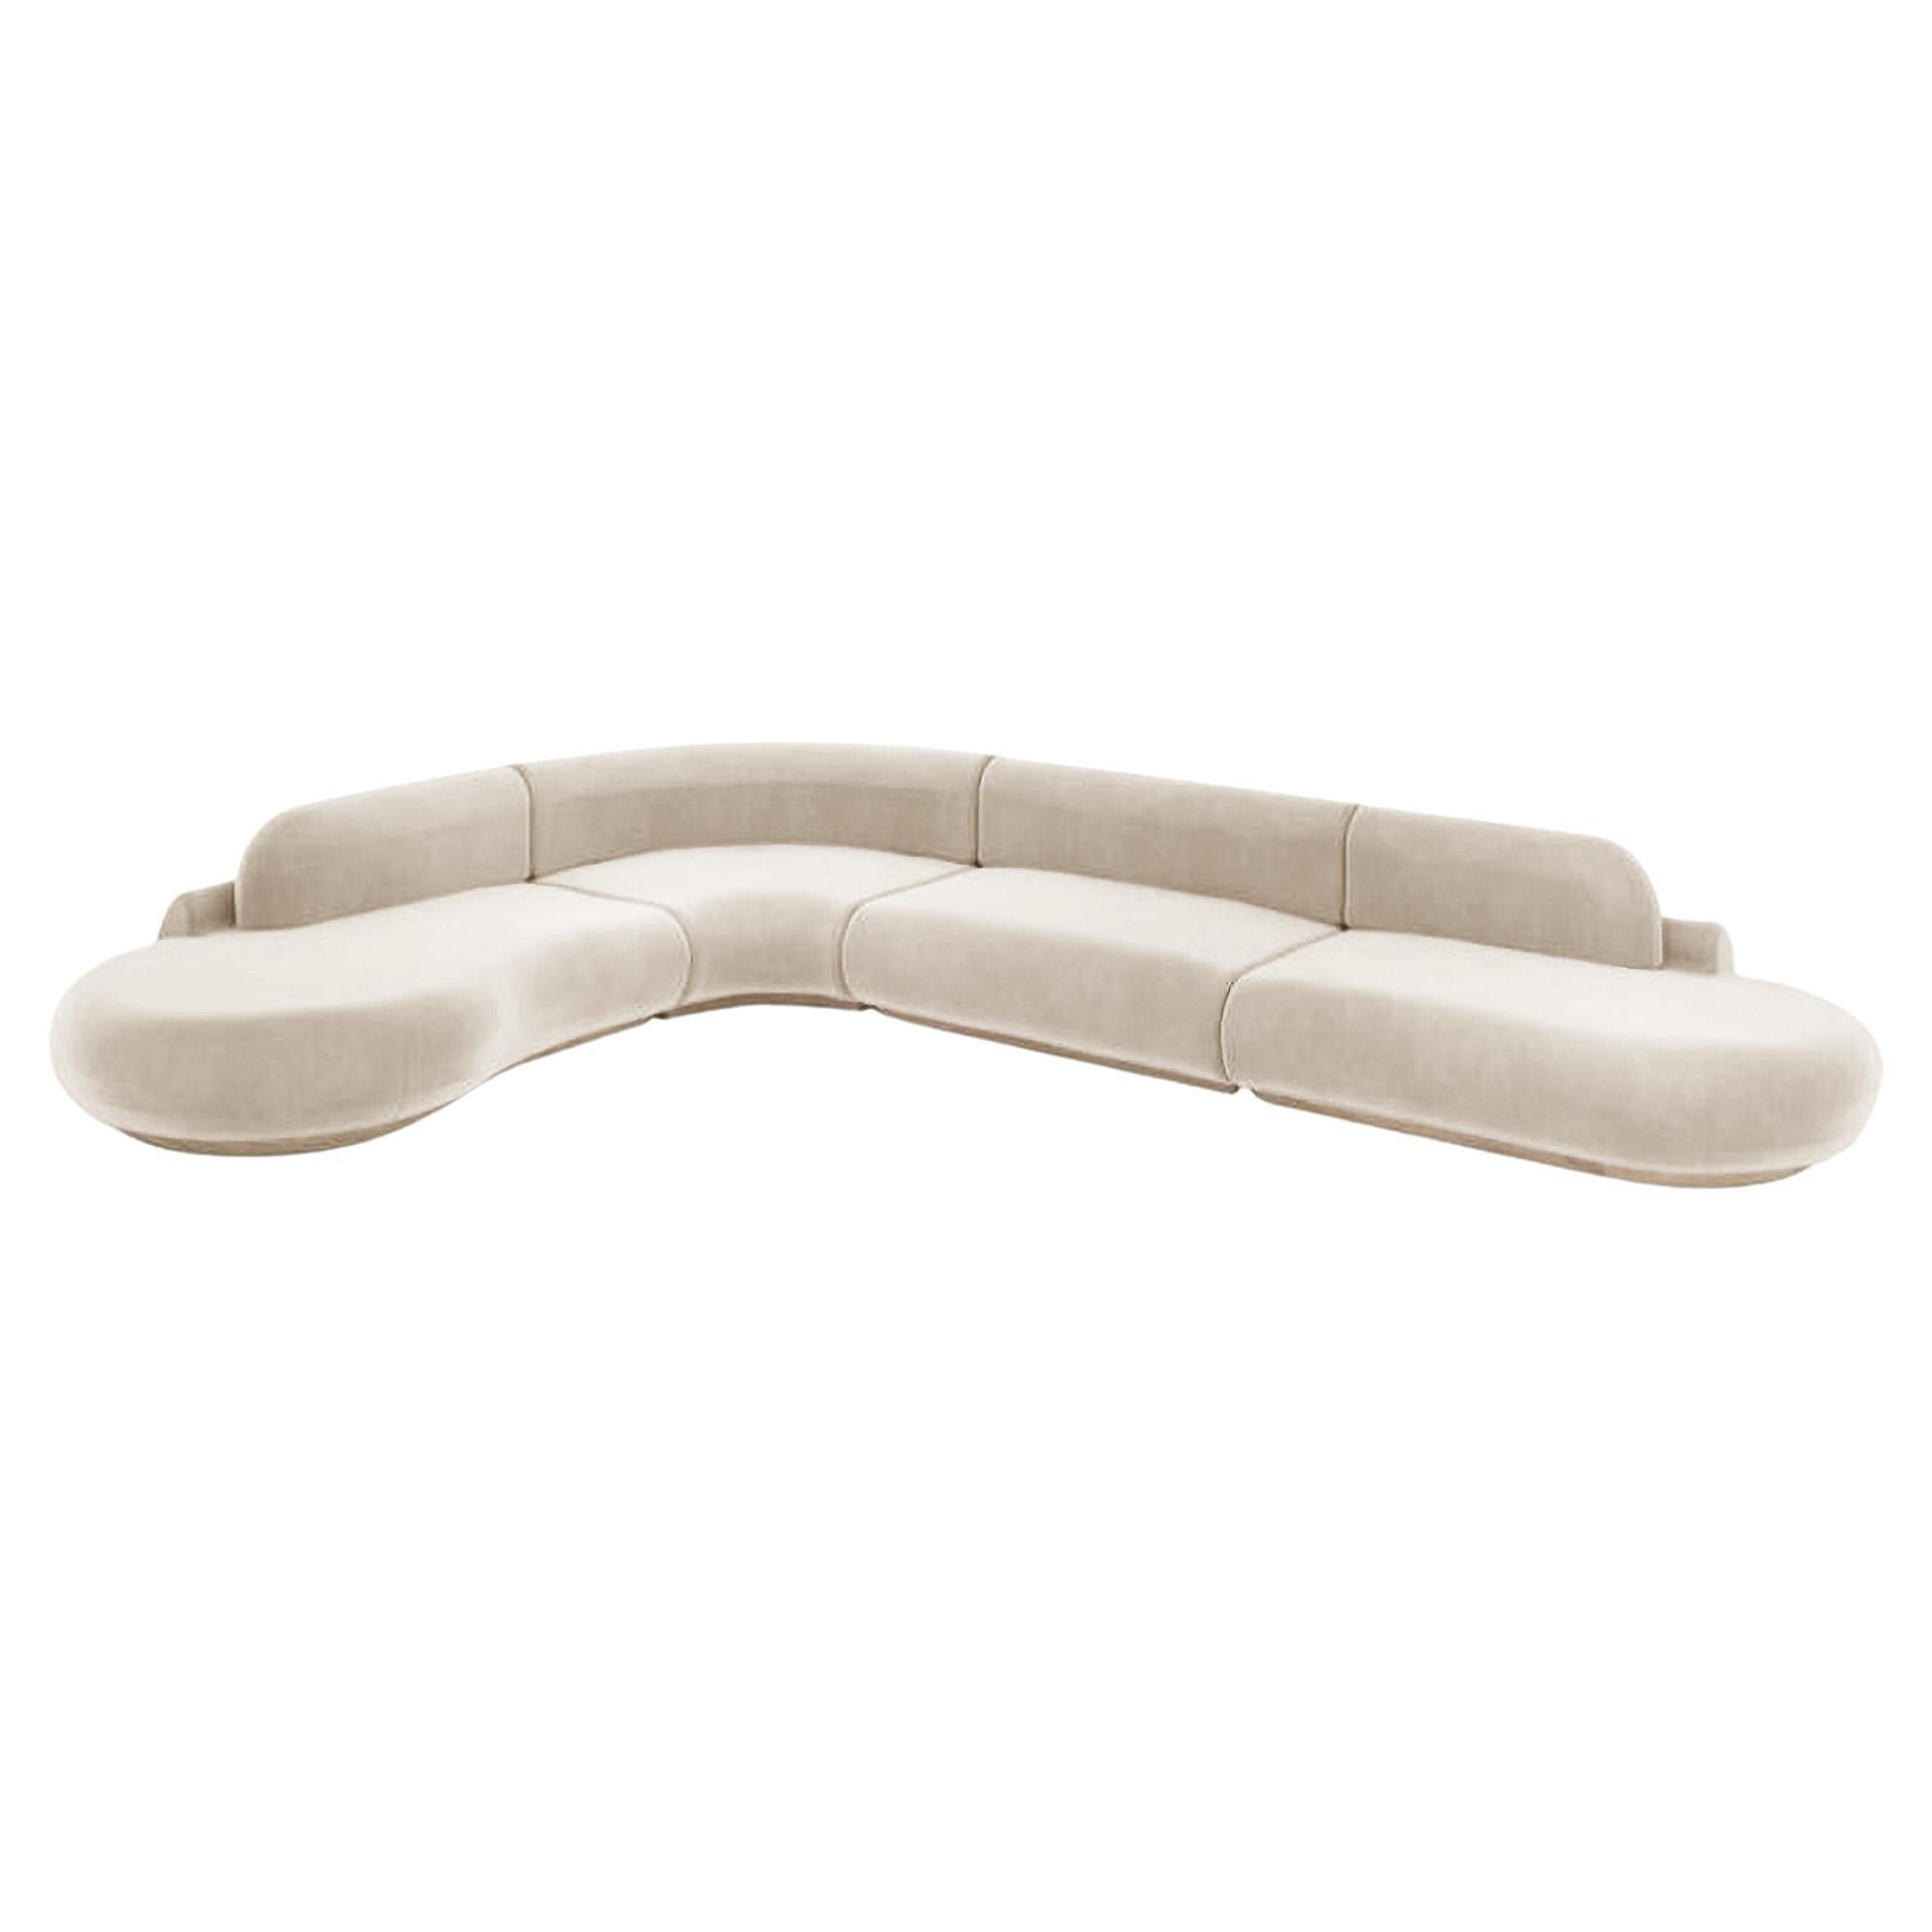 Naked Curved Sectional Sofa, 4 Piece with Natural Oak and Boucle Snow For Sale